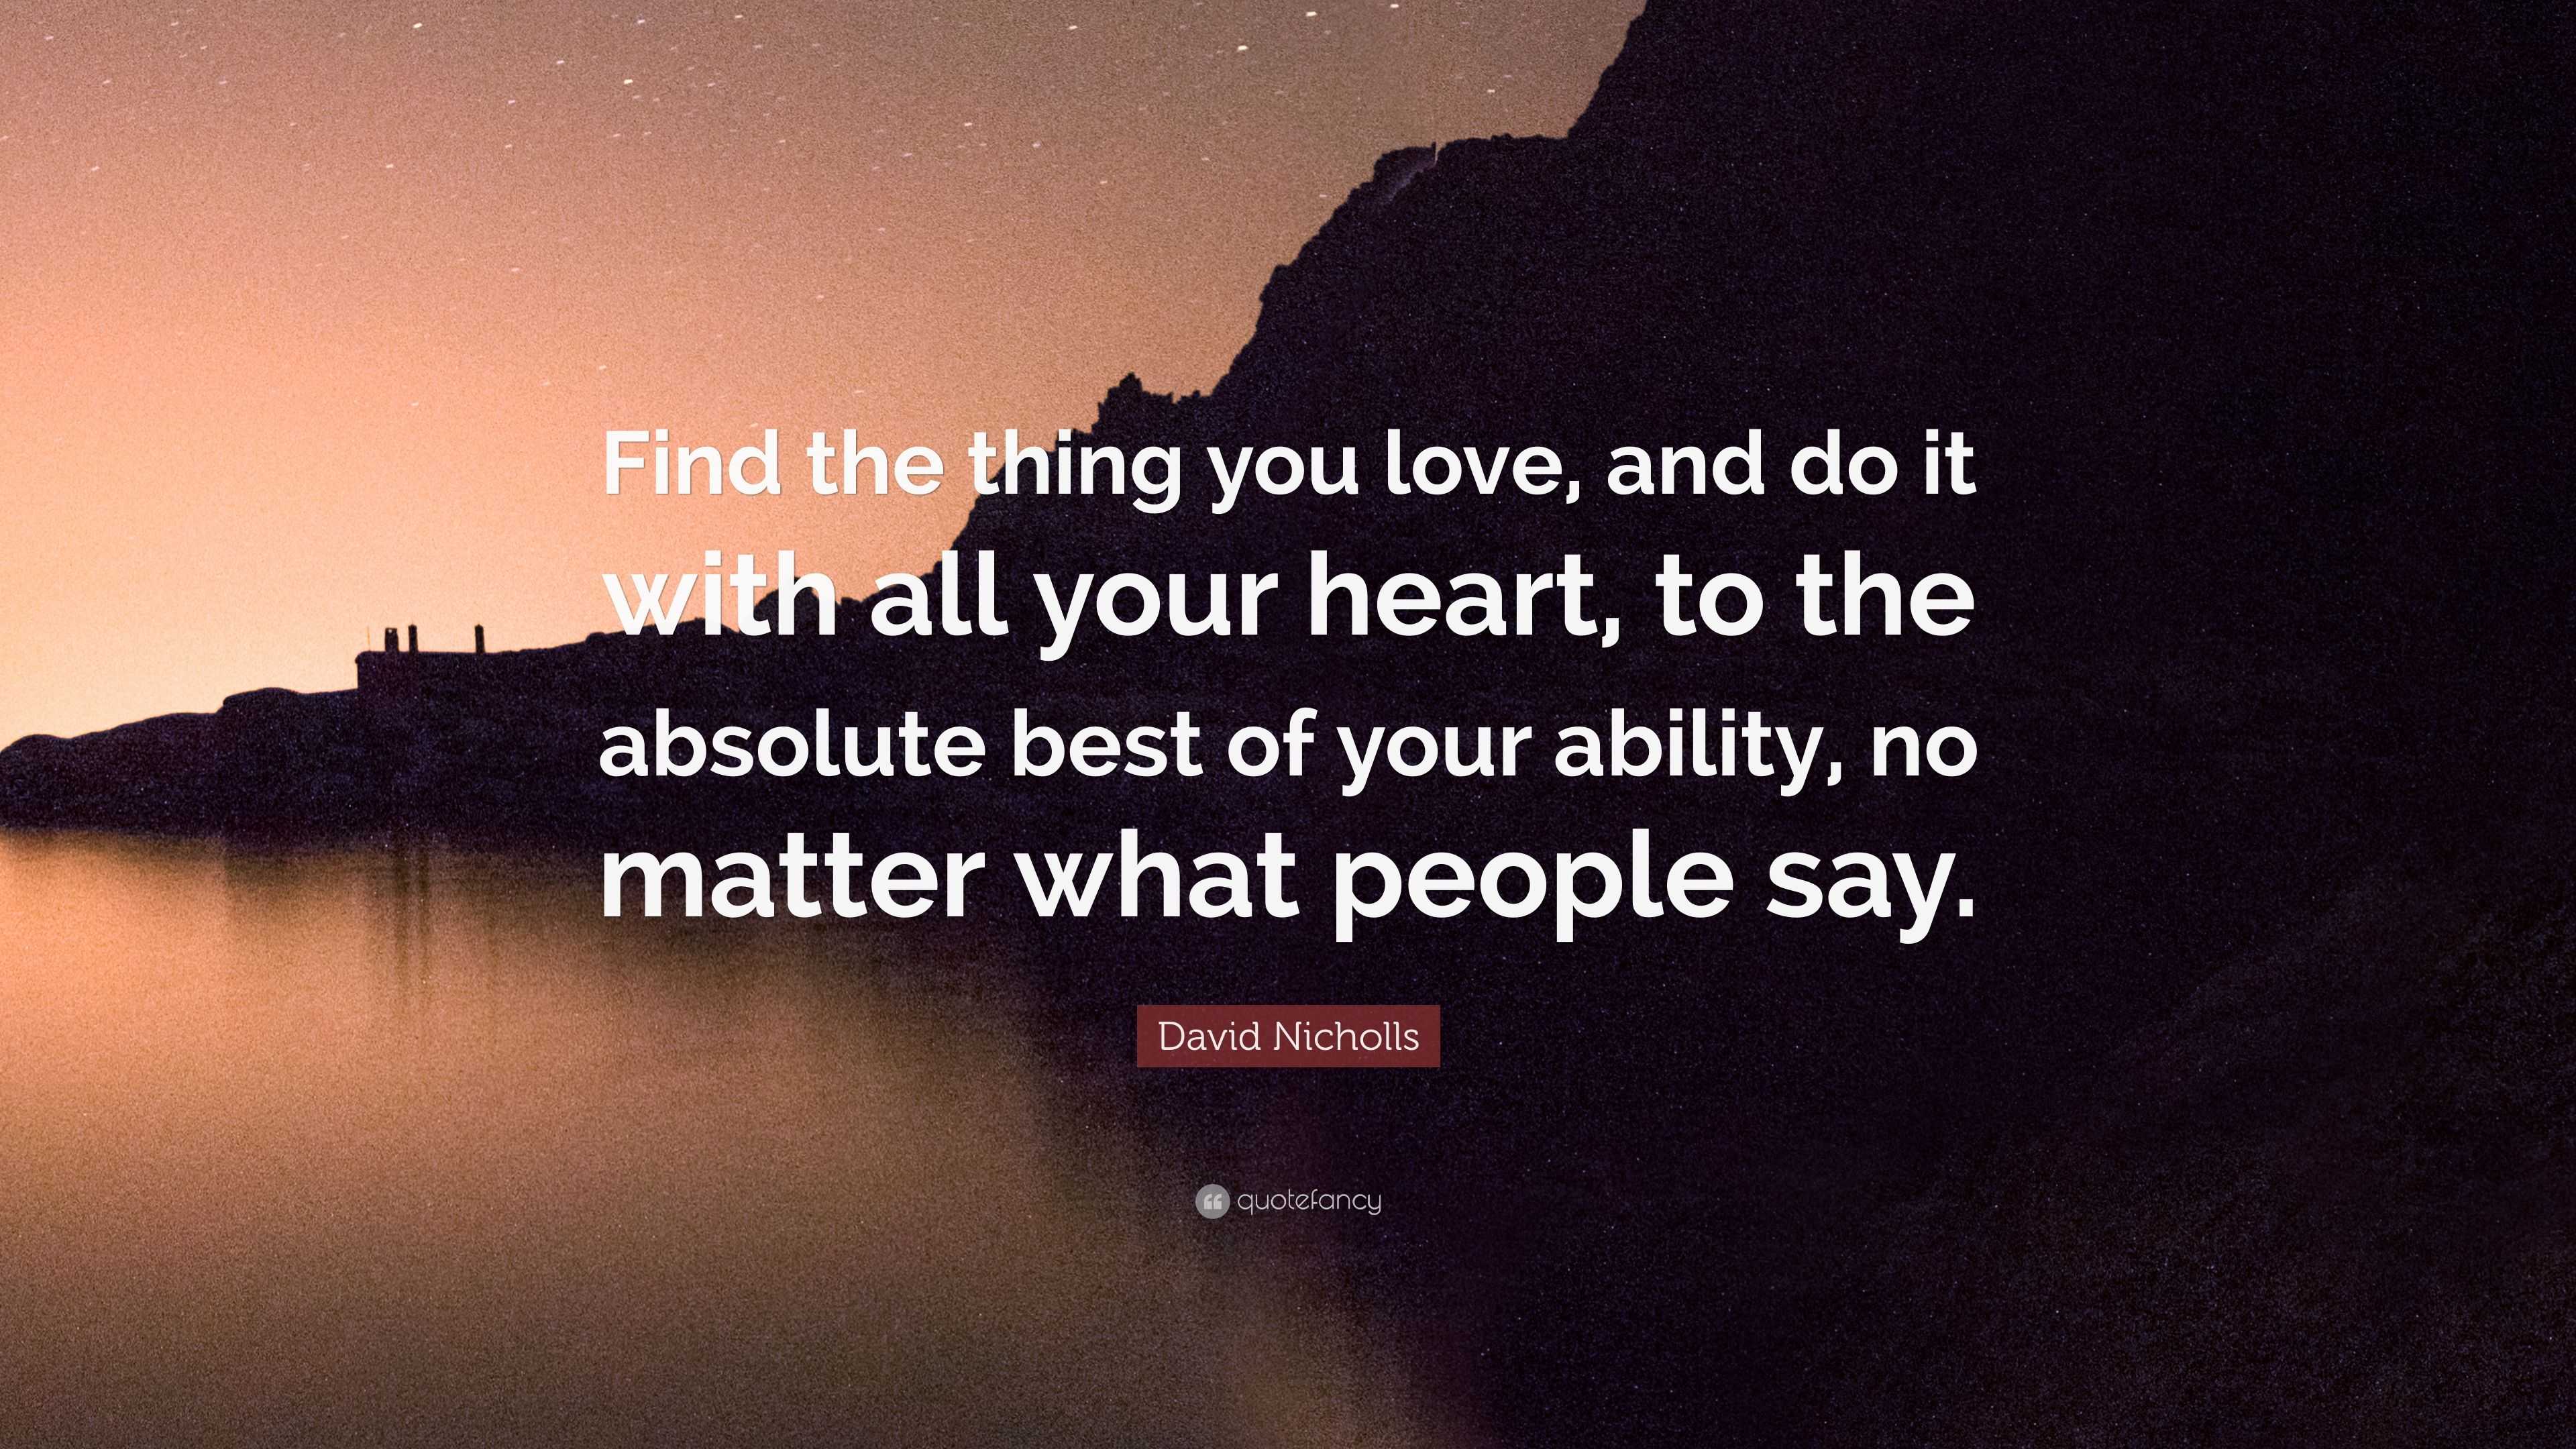 David Nicholls Quote: “Find the thing you love, and do it with all your ...